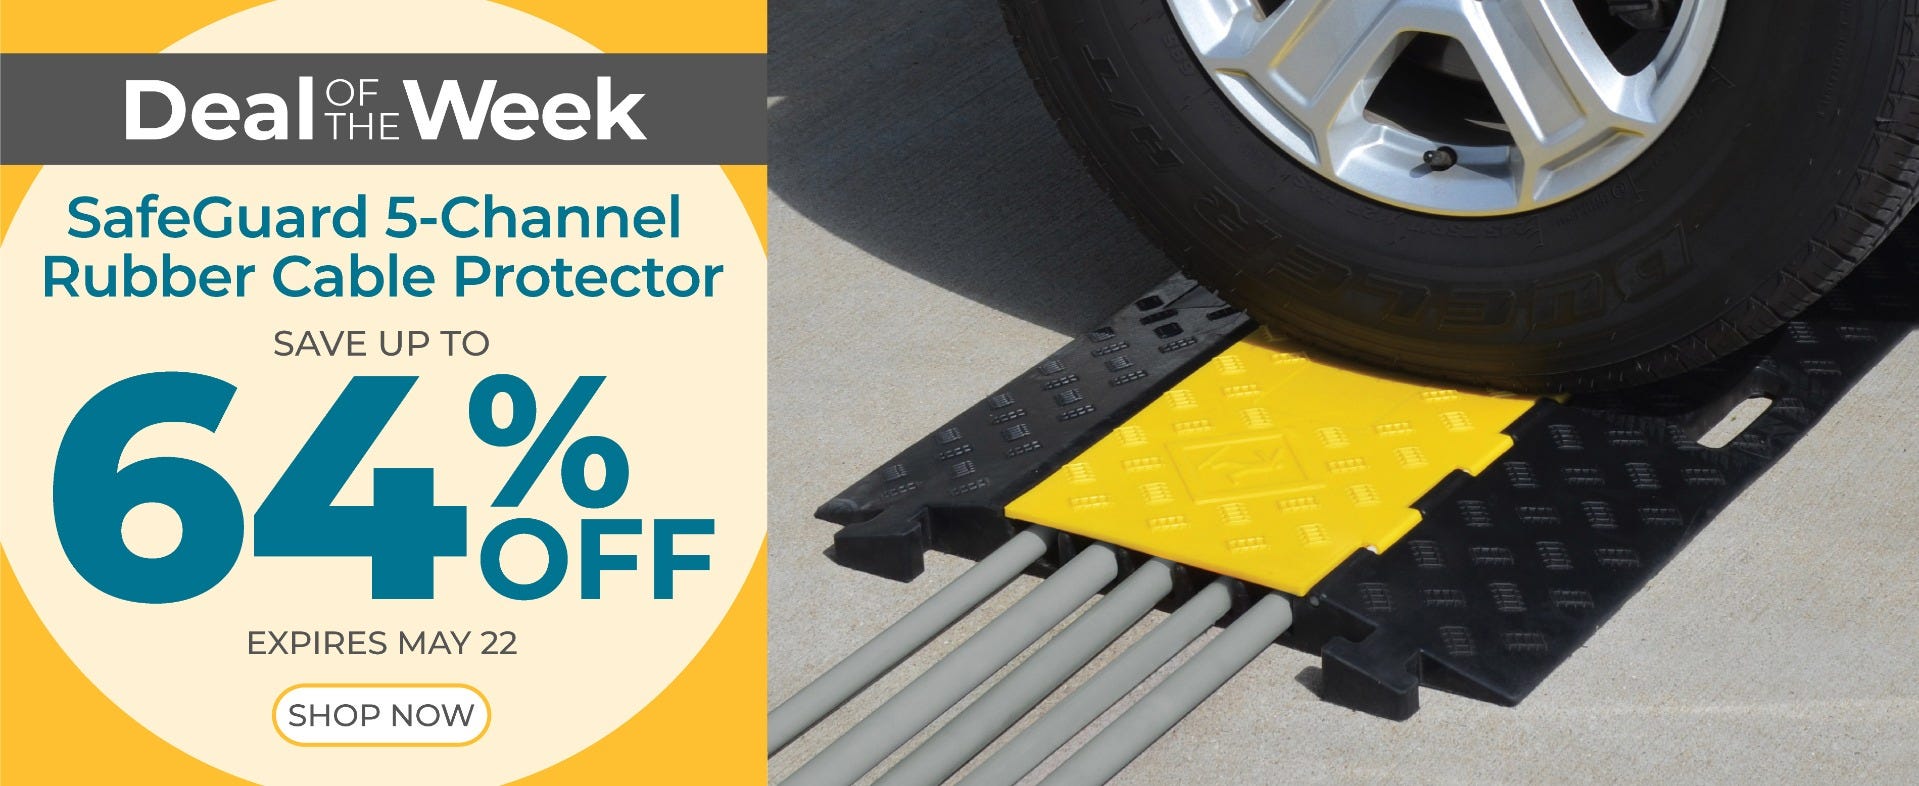 SafeGuard 5-Channel Rubber Cable Protector on sale until May 22nd up to 64% off